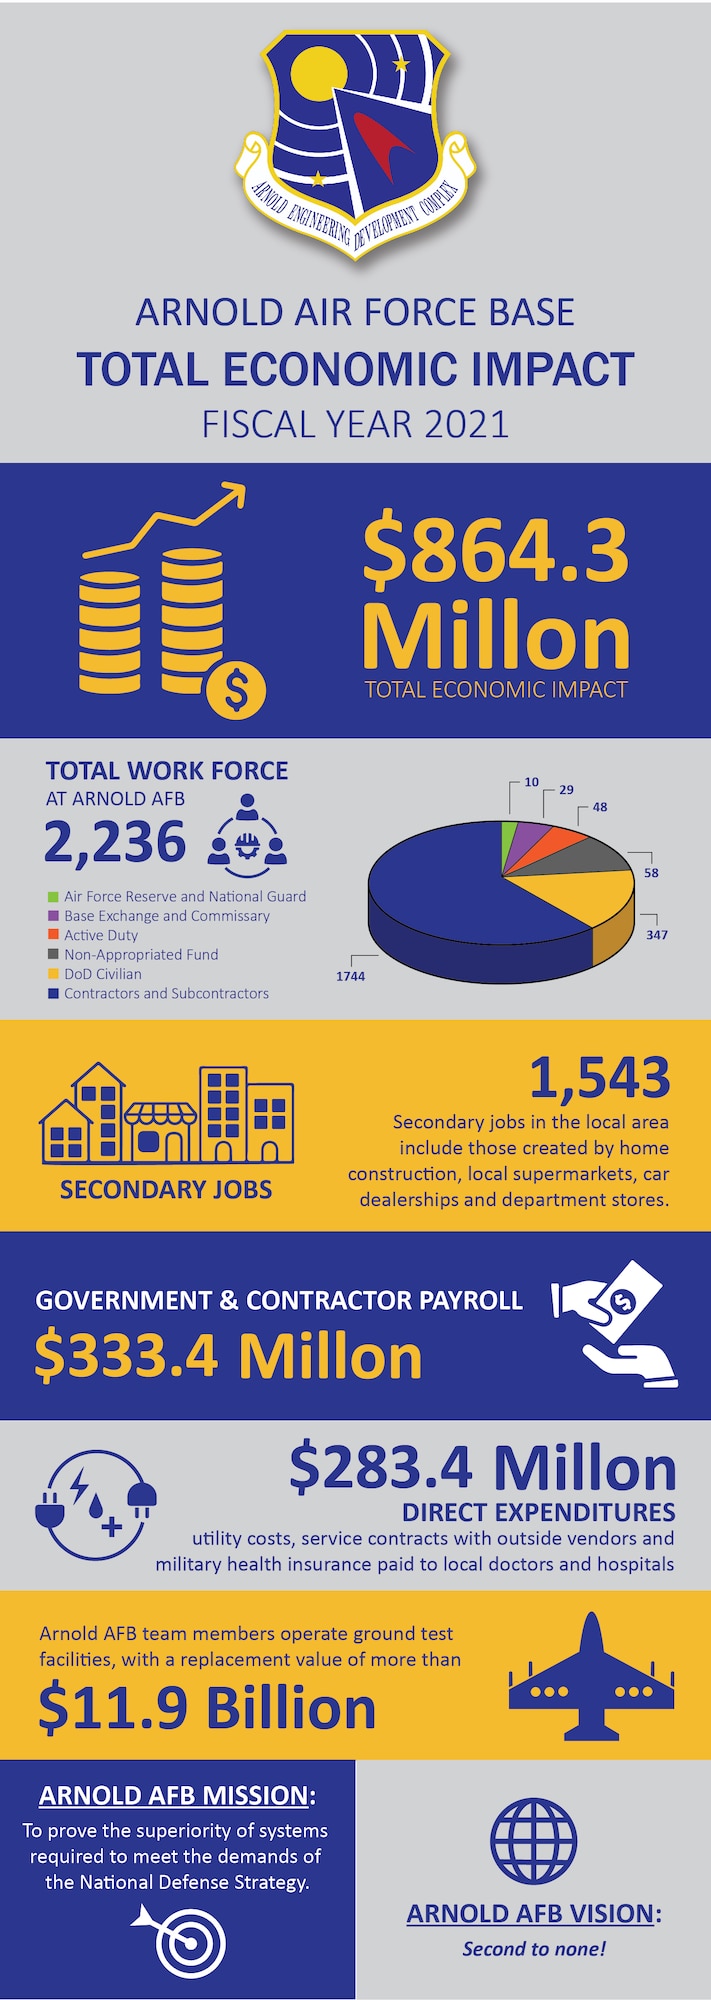 The economic impact of Arnold Air Force Base across the state of Tennessee was $864.3 million for the 2021 fiscal year. Local areas were impacted through payroll, secondary jobs created through local spending, and other expenditures for supplies, utilities, fuel and services and the spin-off impact of those purchases. (U.S. Air Force graphic by Brooke Brumley)